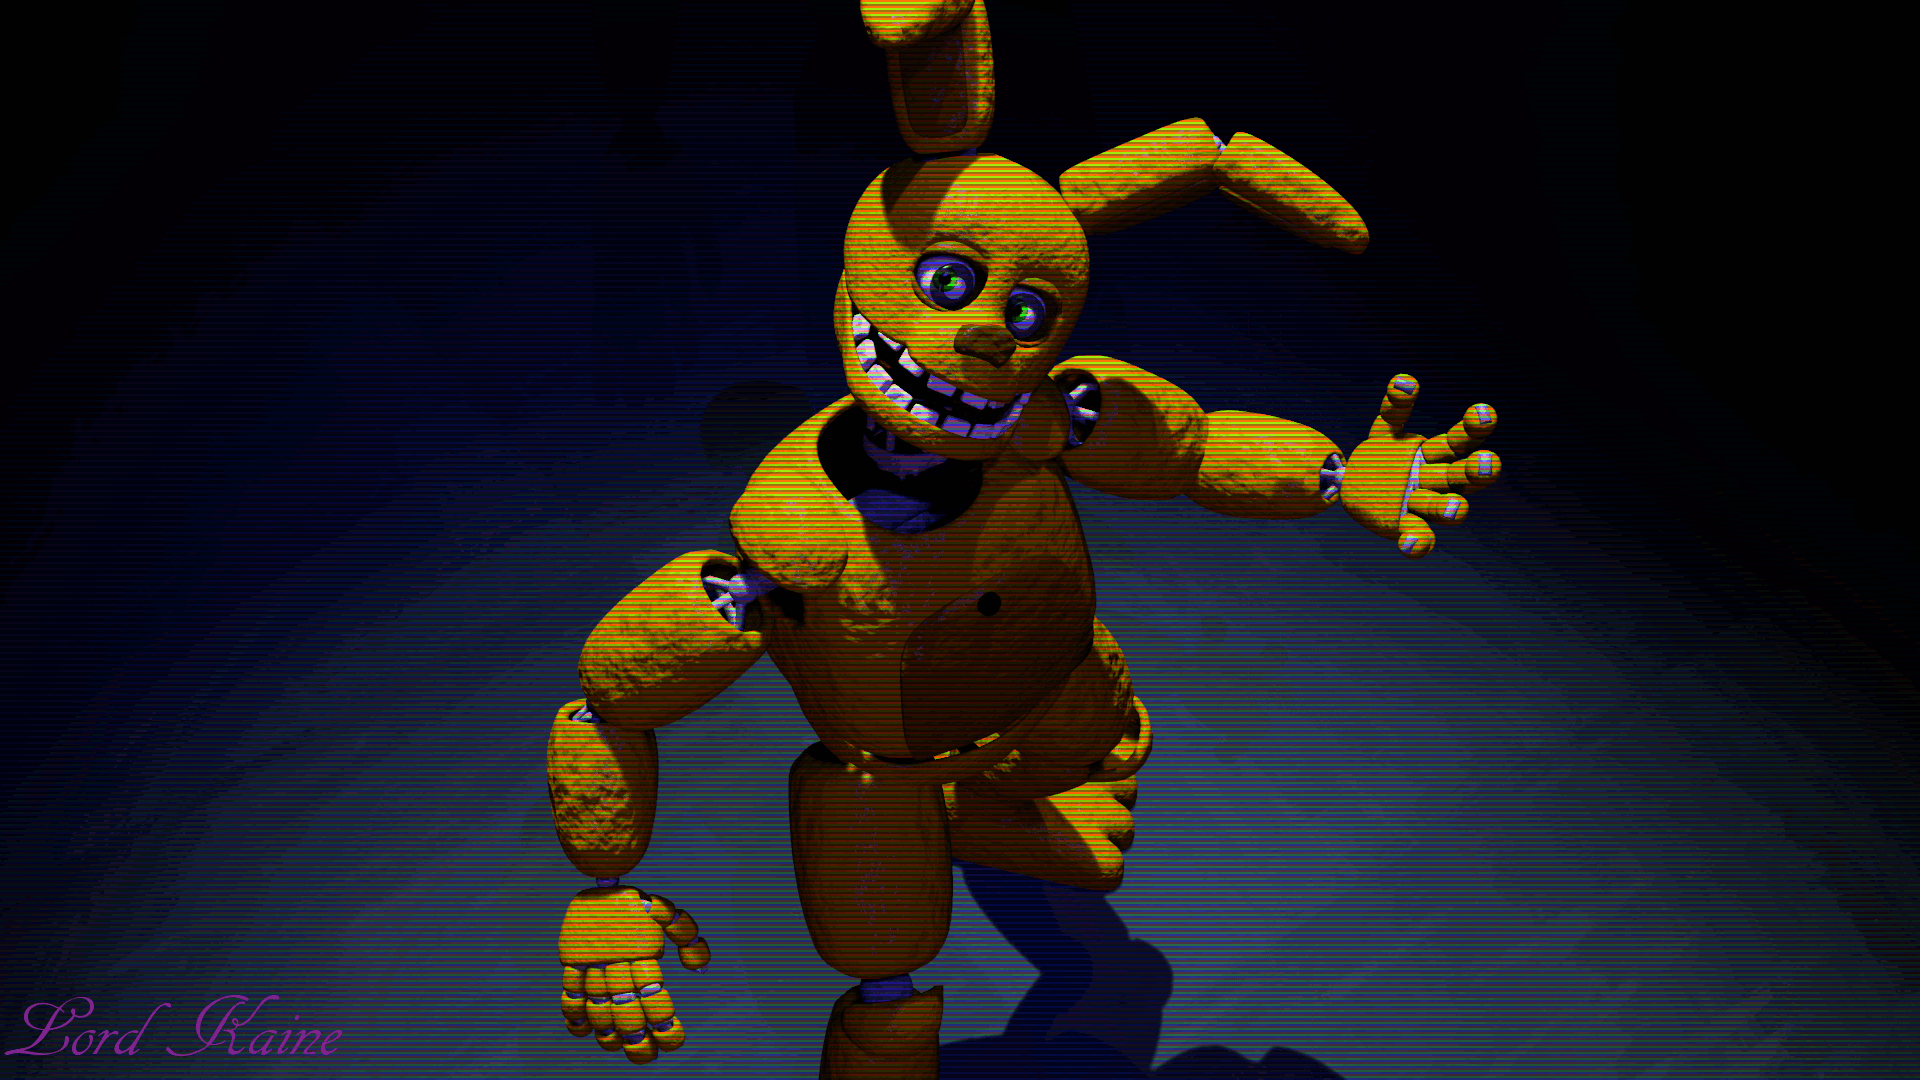 Spring Bonnie Fnia Boobscare Gif Pictures To Pin On.